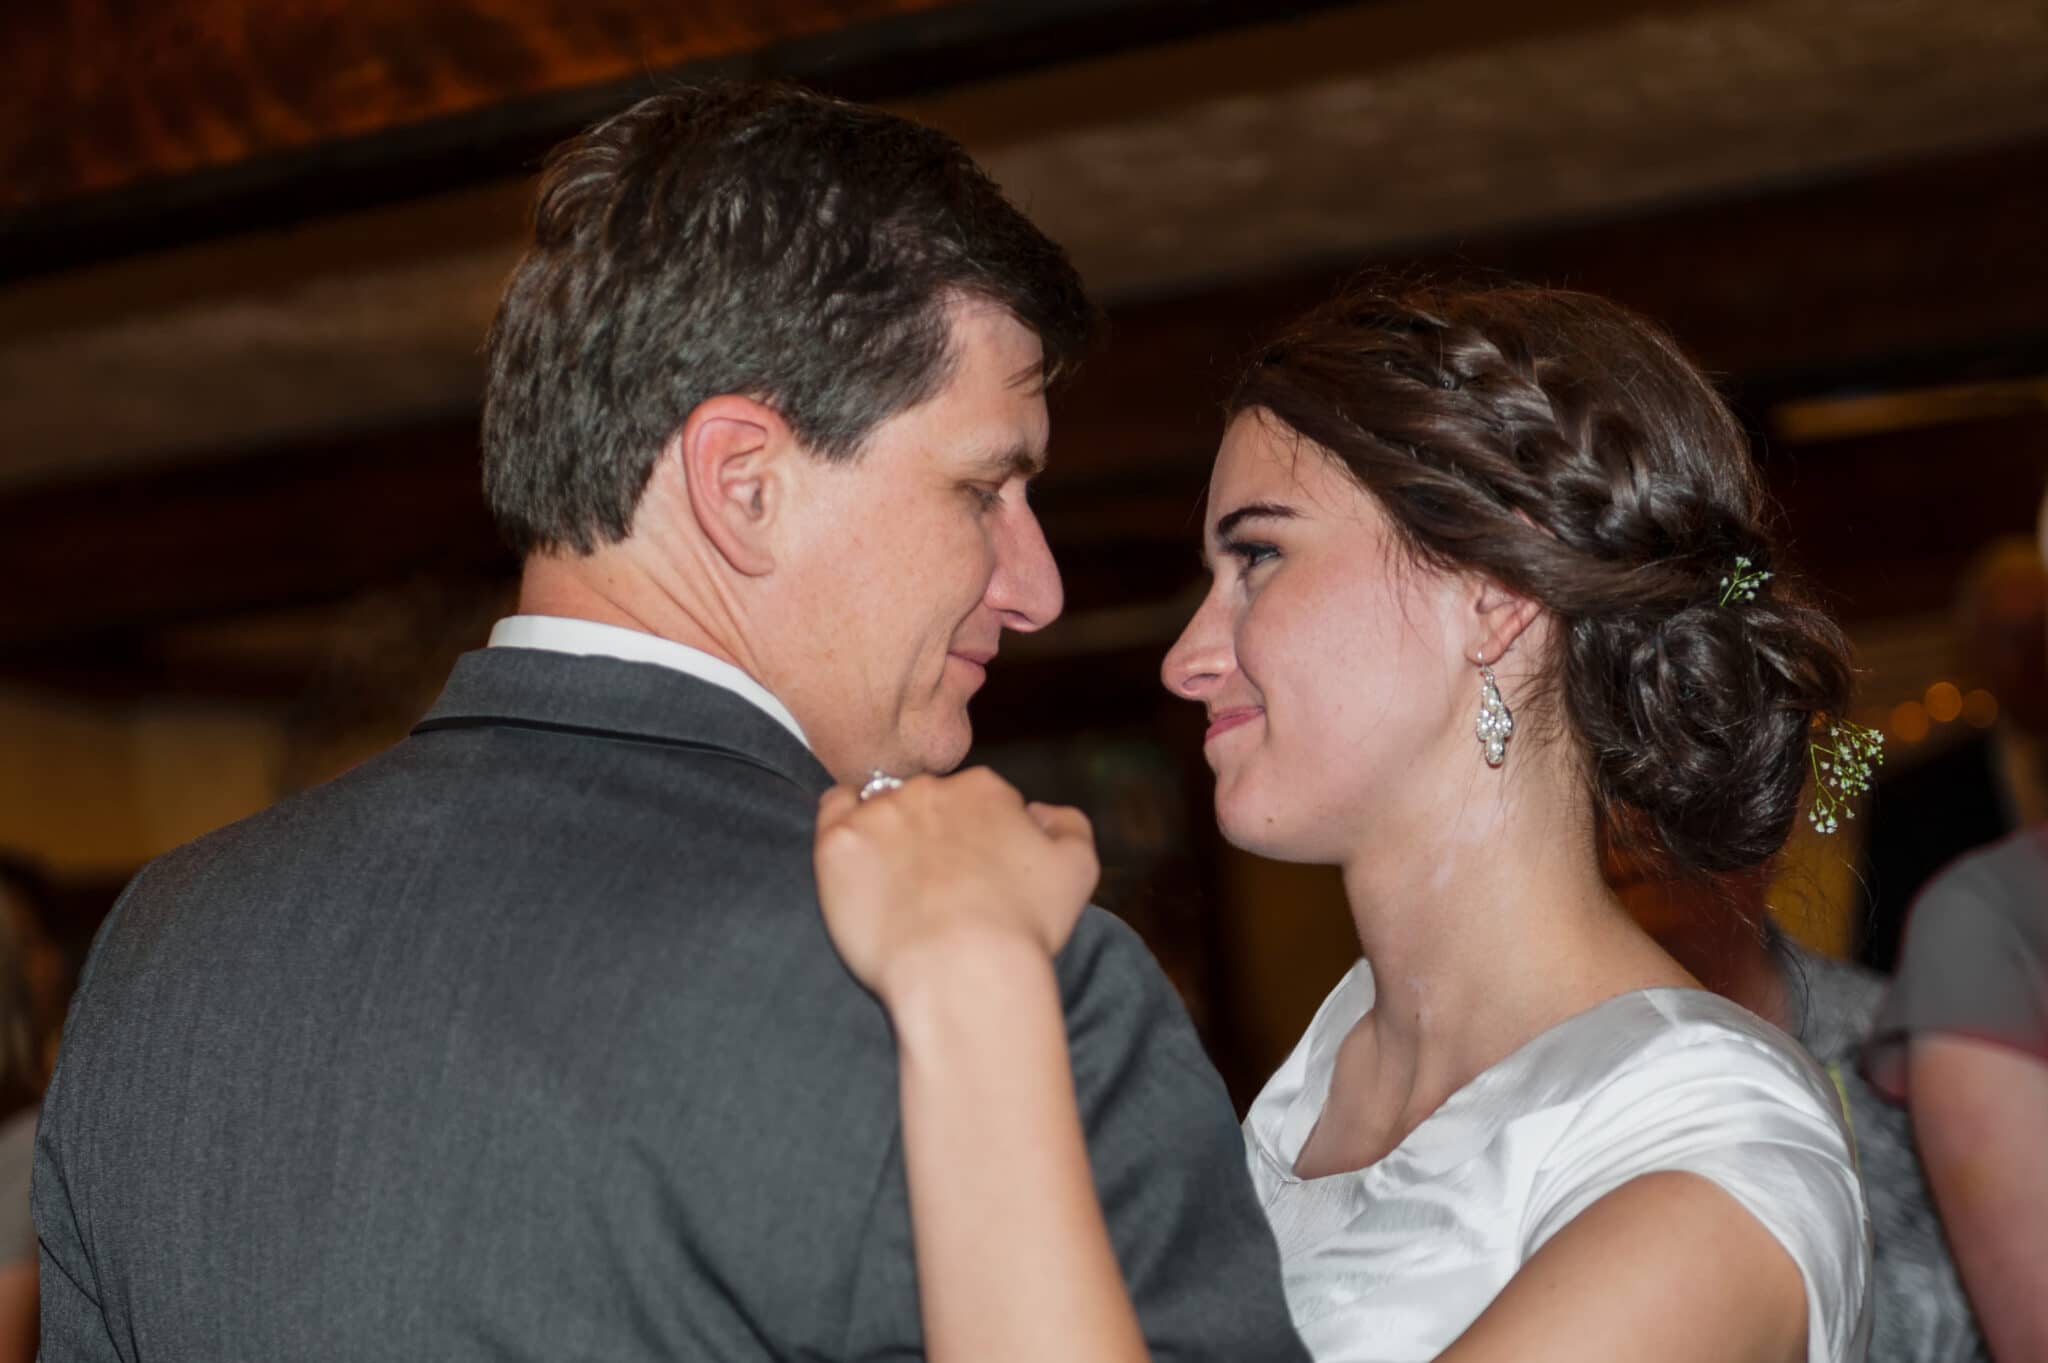 The father of the bride and his daughter dance together in a special wedding dance.